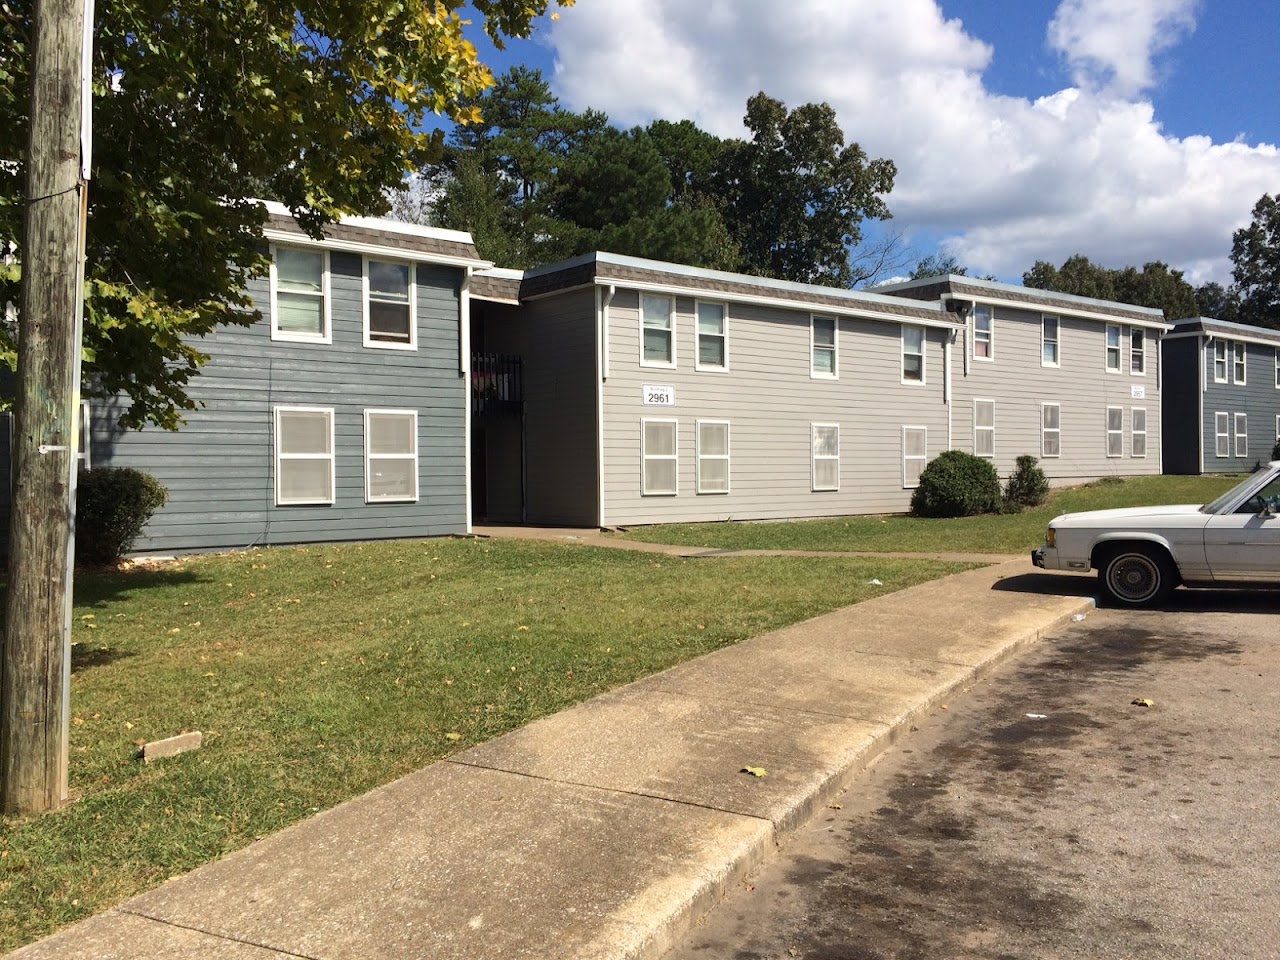 Photo of VALLEY BROOK APTS. Affordable housing located at 2969 GALLANT DR BIRMINGHAM, AL 35215